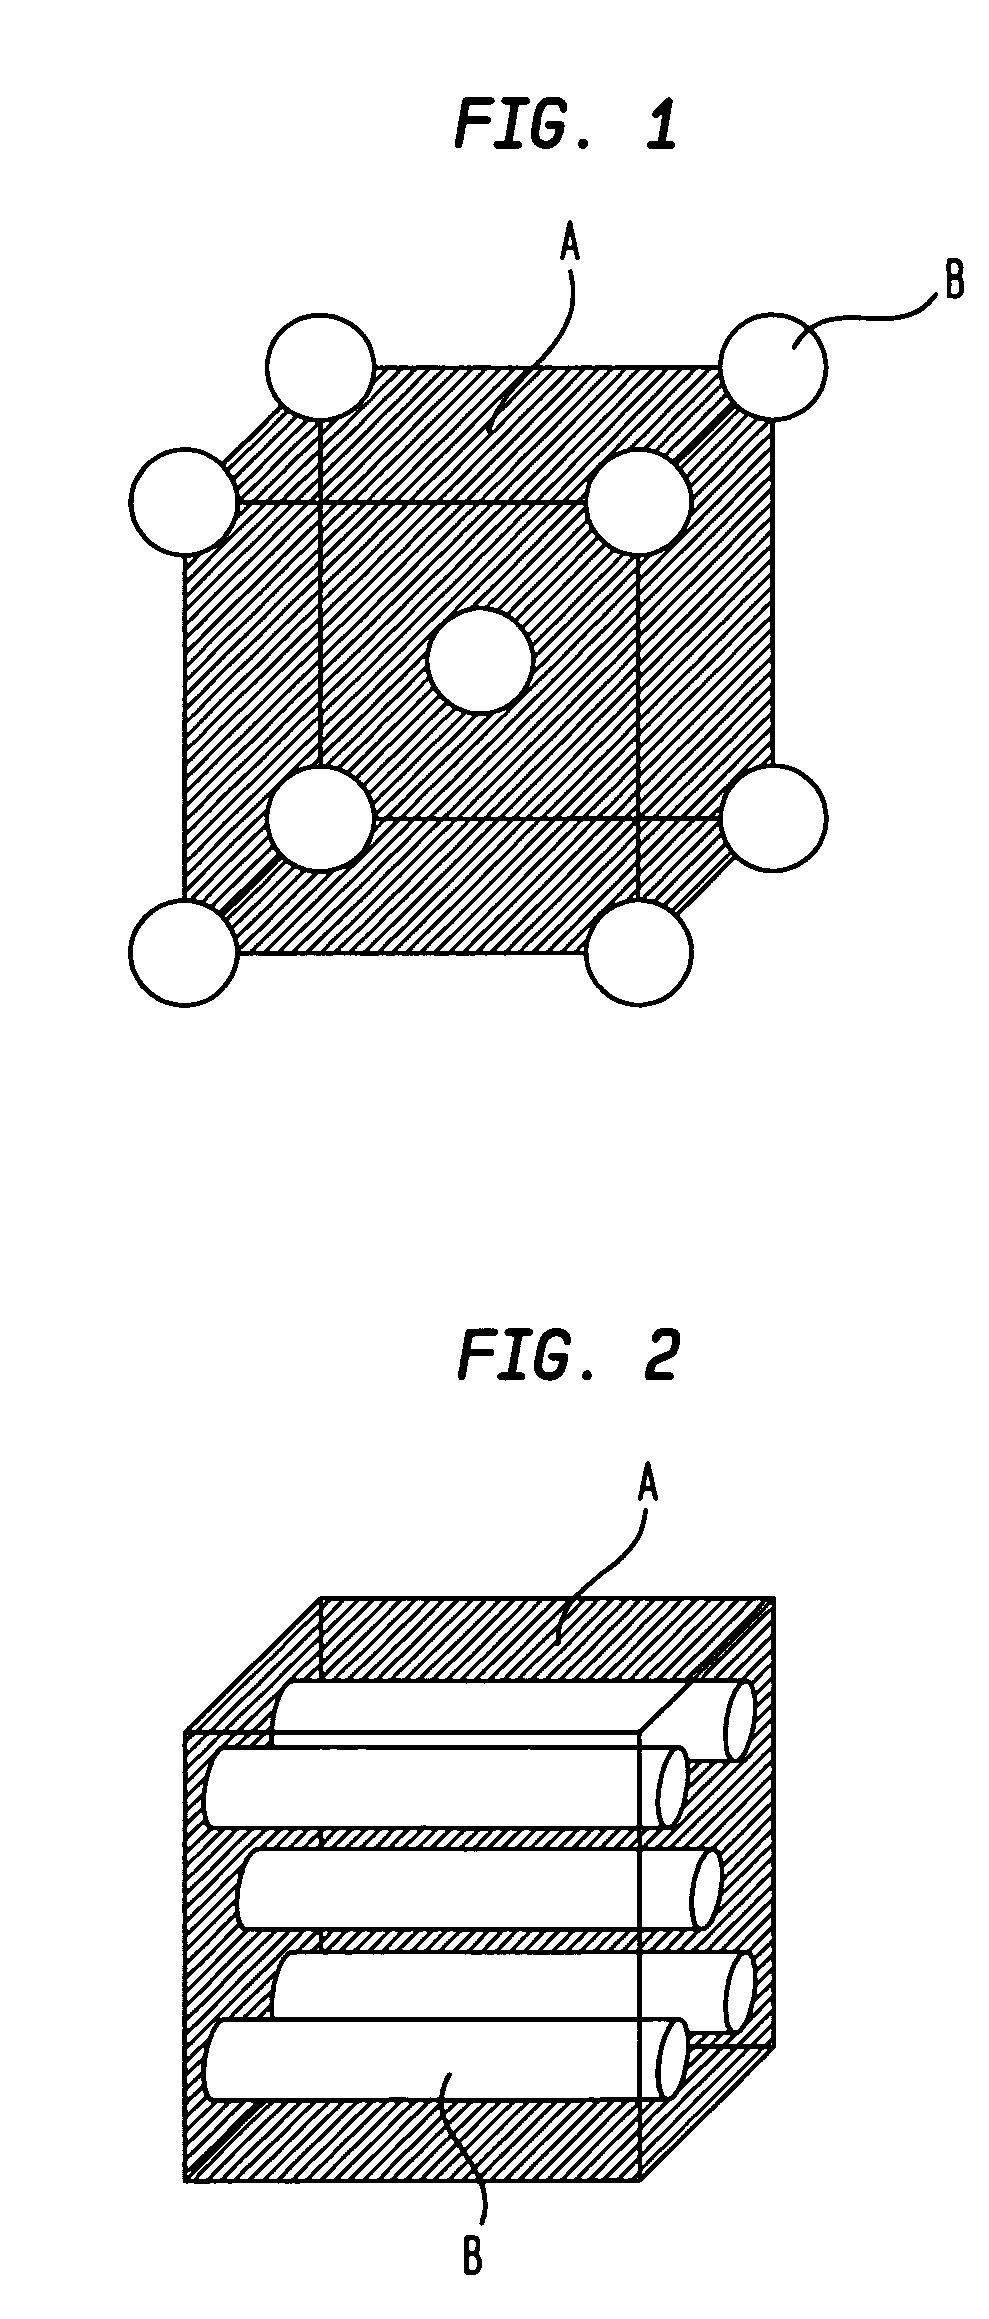 Methods for forming improved self-assembled patterns of block copolymers